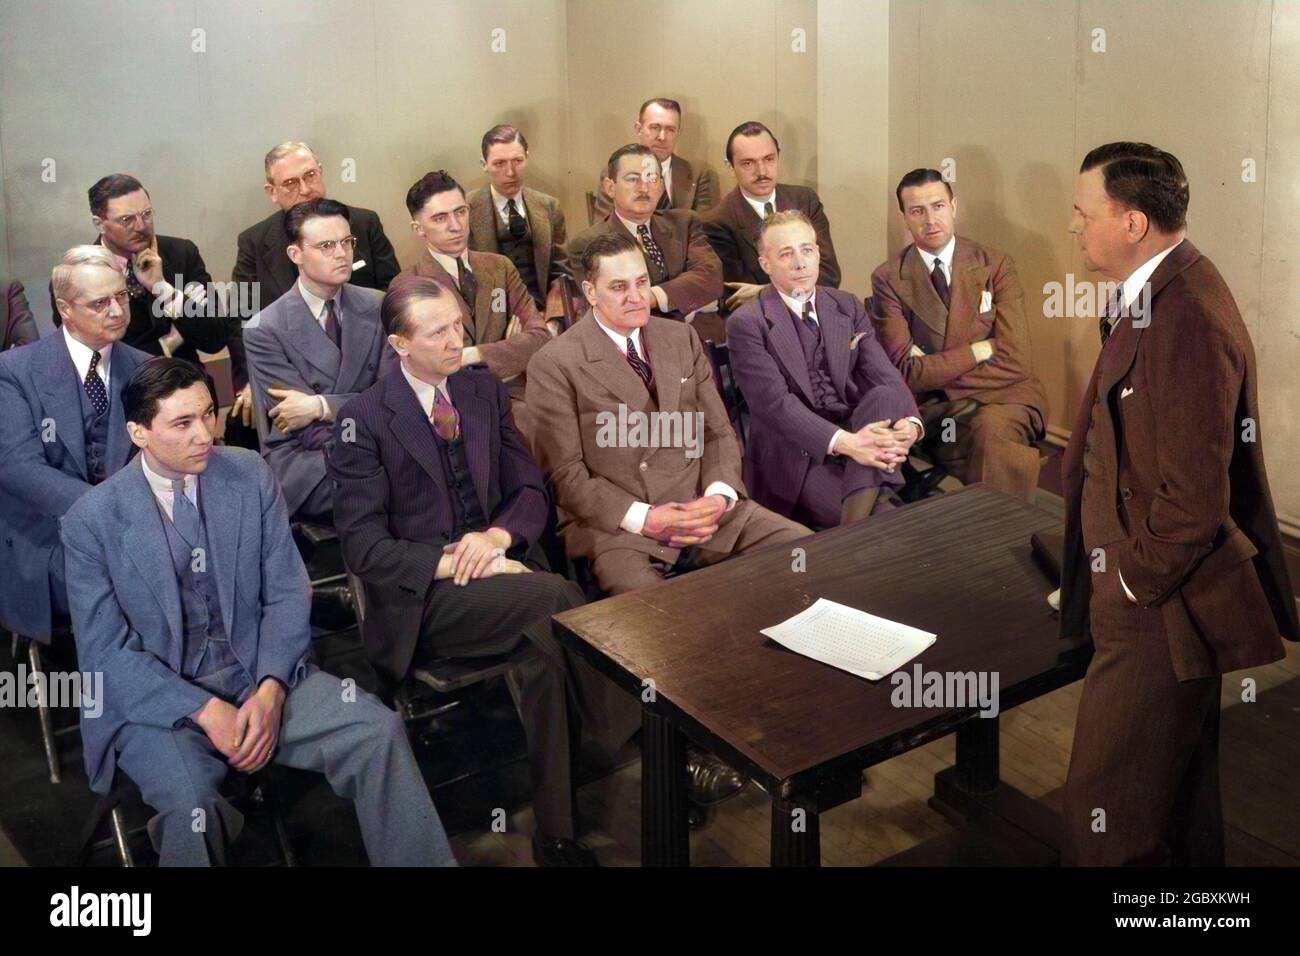 1930s 1940s 1950s MEETING OF A GROUP OF BUSINESSMEN SALESMEN IN A CLASSROOM FOR A SALES TRAINING LECTURE - s10205c HAR001 HARS MANAGER COPY SPACE HALF-LENGTH GROWN-UP PROFESSION SENIOR MAN EXECUTIVES MEET MIDDLE-AGED MAN LECTURE WHITE COLLAR OCCUPATION HIGH ANGLE NETWORKING OCCASION OCCUPATIONS POLITICS SEMINAR BOSSES STYLISH COOPERATION MANAGERS MID-ADULT MAN PEOPLE ADULTS SALESMEN TOGETHERNESS CAUCASIAN ETHNICITY HAR001 OLD FASHIONED Stock Photo